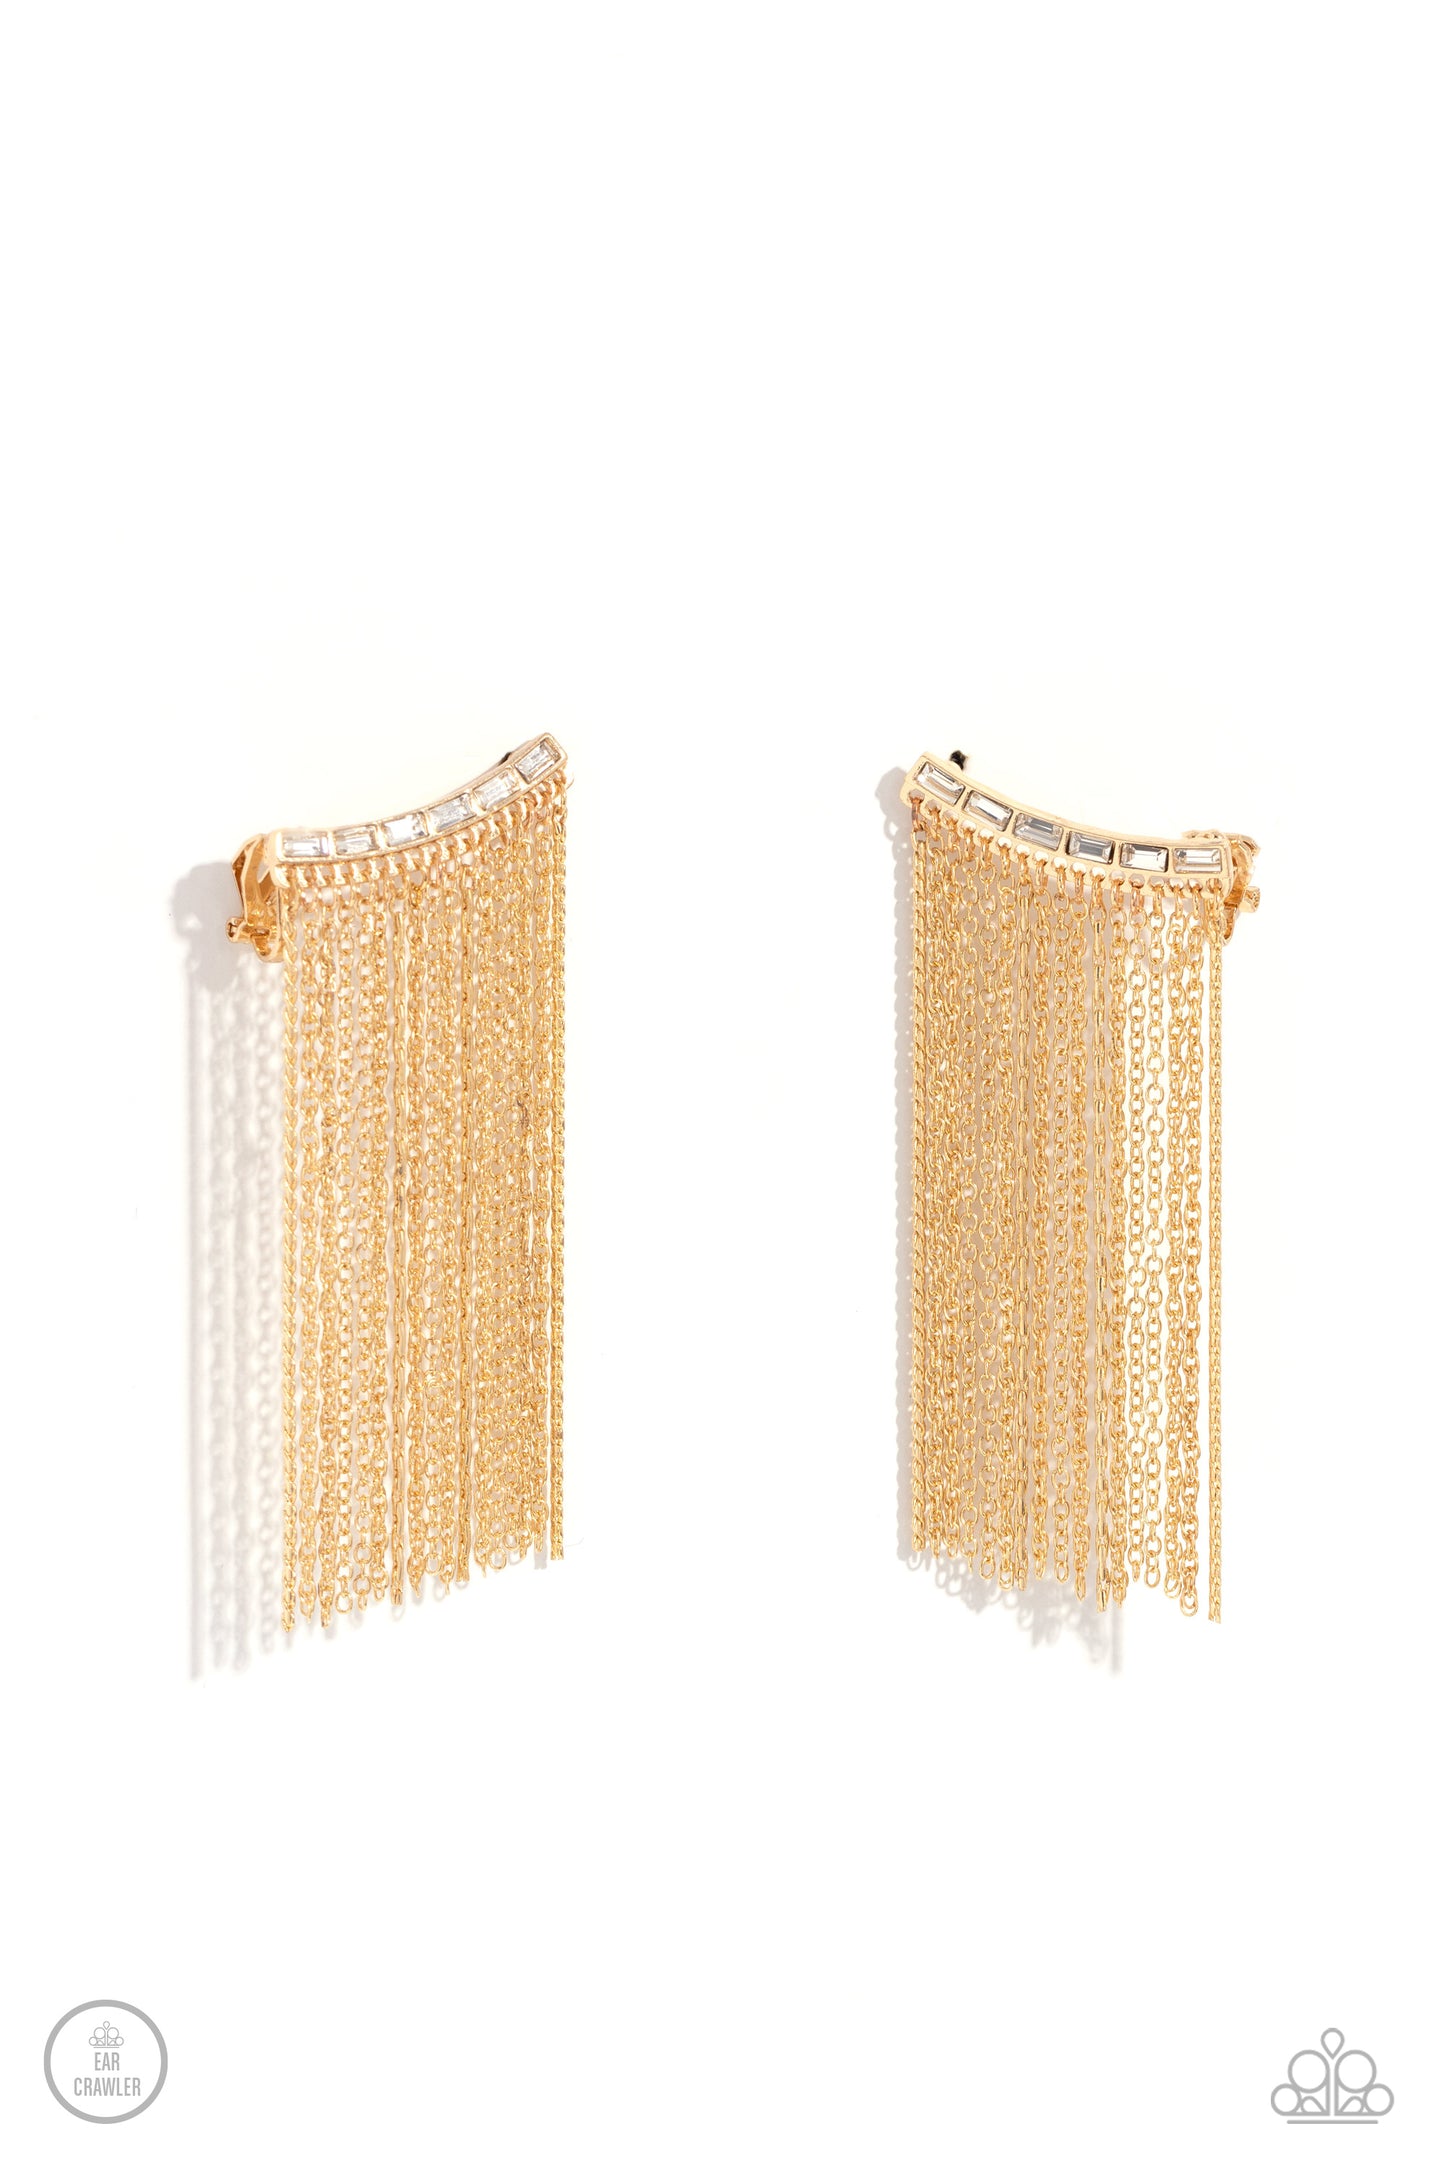 Paparazzi Accessories - Feuding Fringe - Gold Earrings a tapered fringe of mismatched dainty gold chains cascades from the edge of a curving white emerald-cut gem-encrusted frame, creating an edgy centerpiece atop the ear. Features an extended post fitting that climbs the back of the ear and can be pressed together for a more secure fit.  Sold as one pair of ear crawlers.